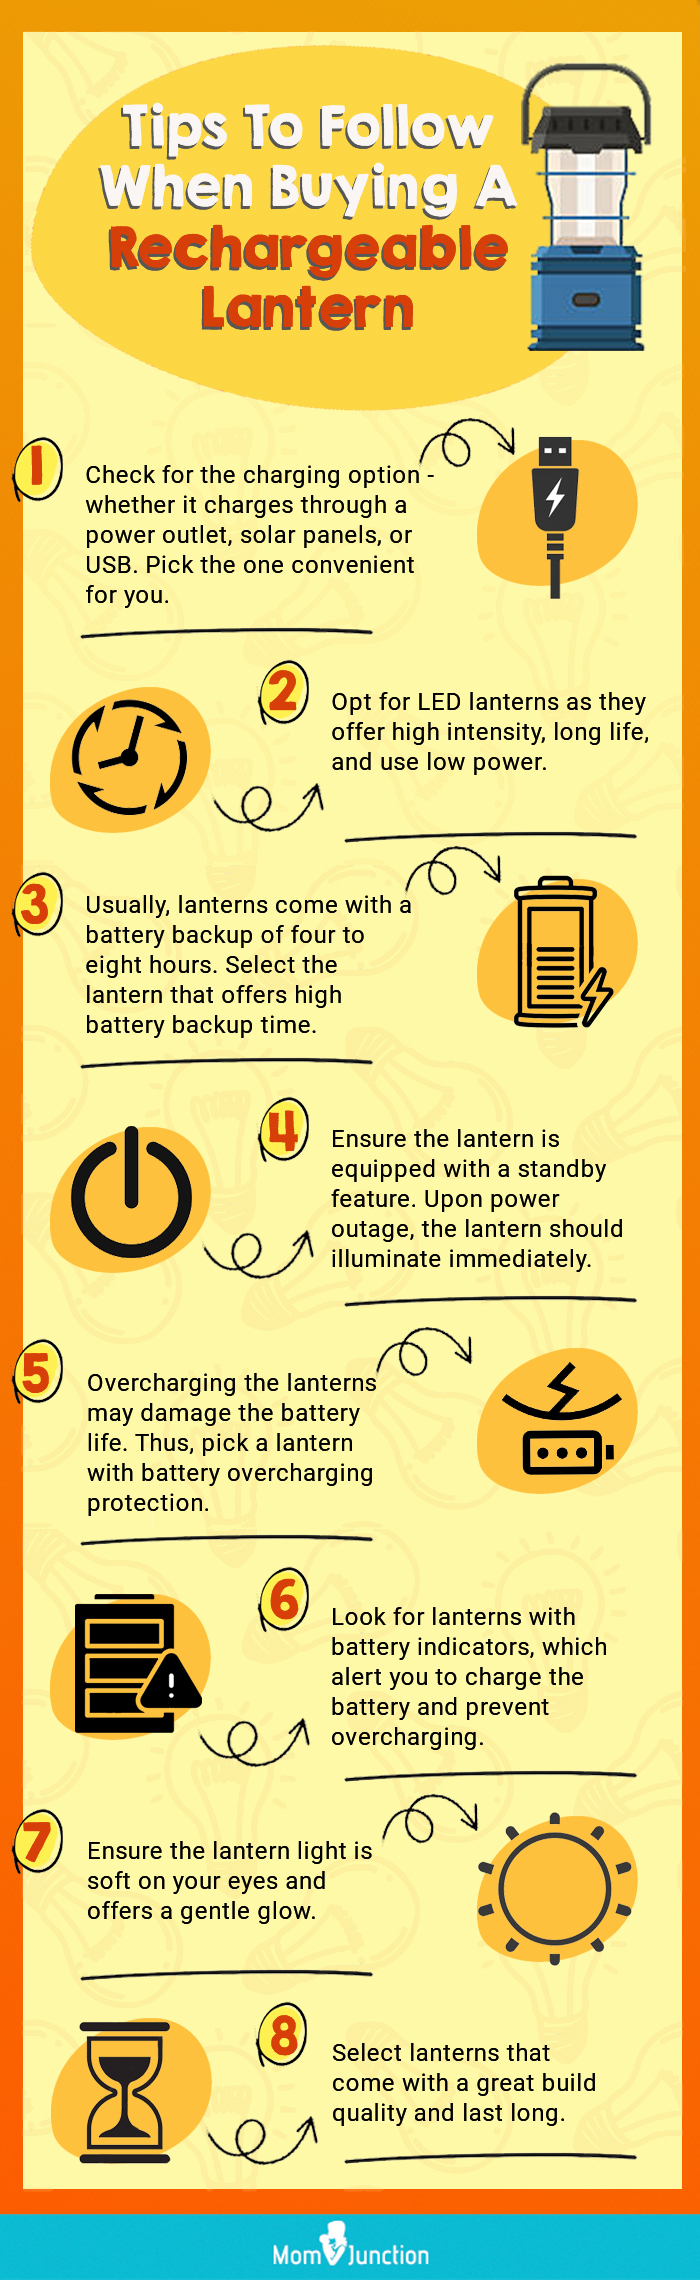 Tips To Follow When Buying A Rechargeable Lantern (infographic)